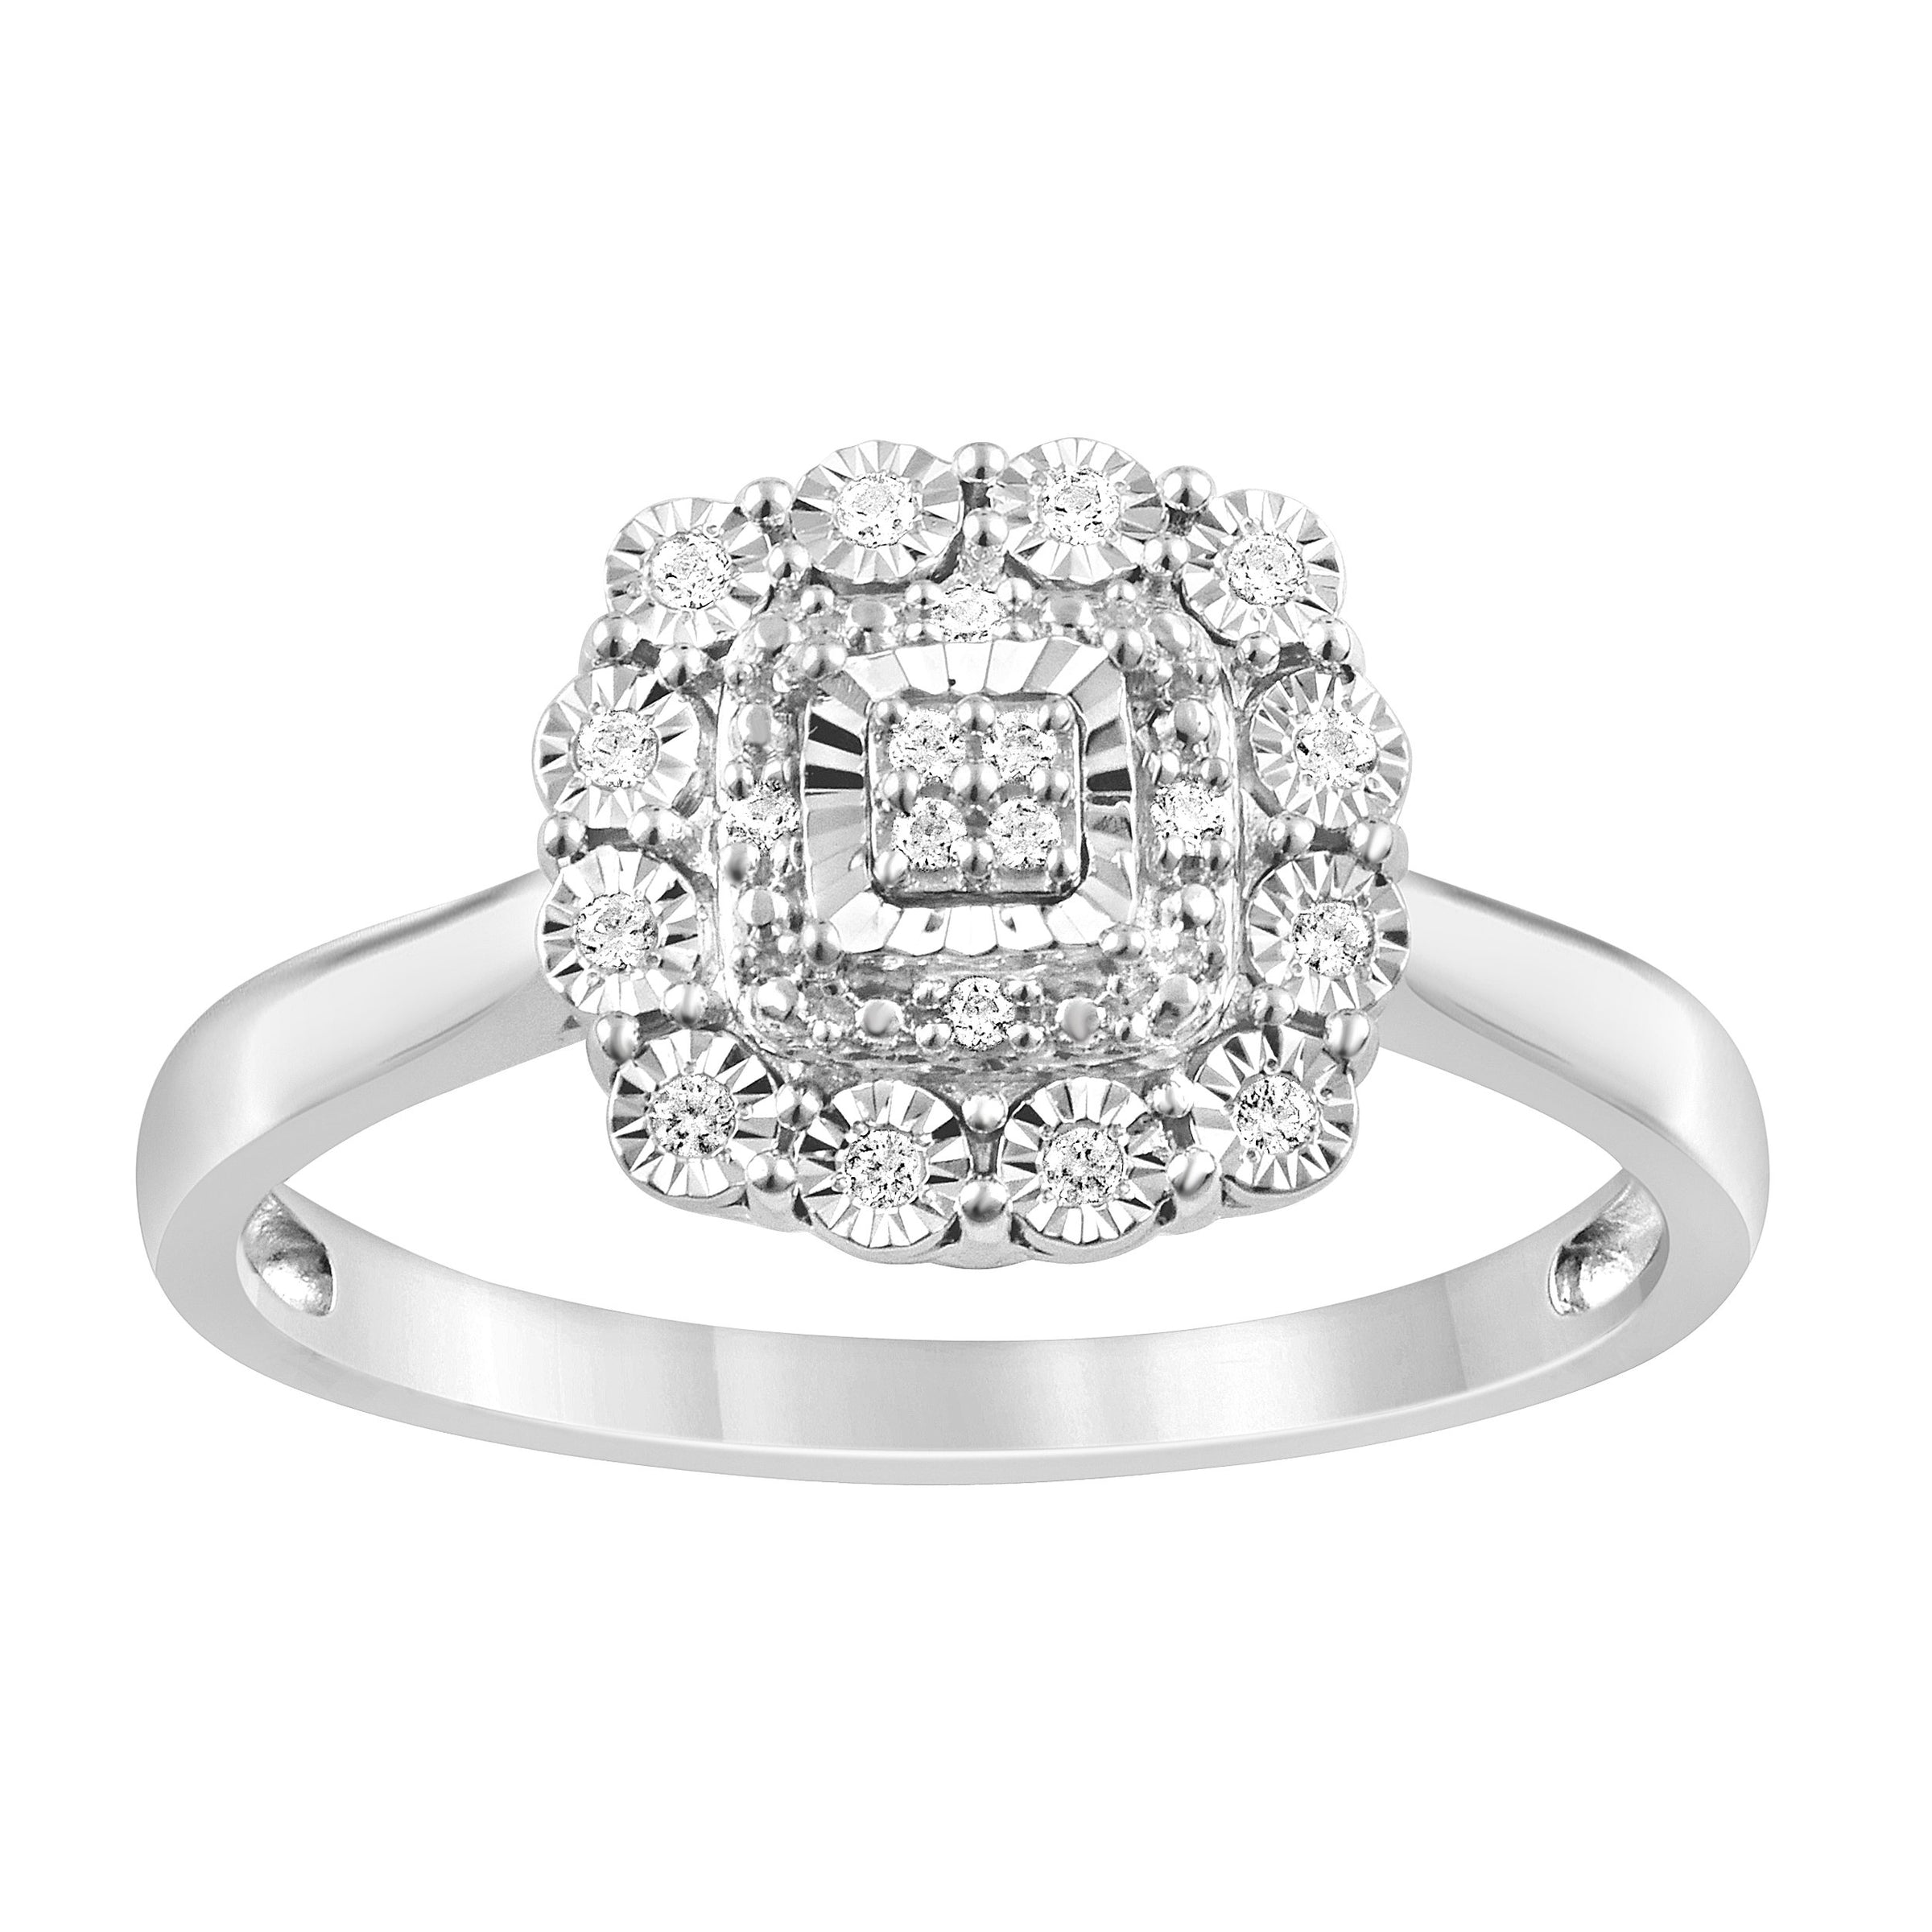 Brilliant Claw Surround Ring with 0.10ct of Diamonds in Sterling Silver Rings Bevilles 